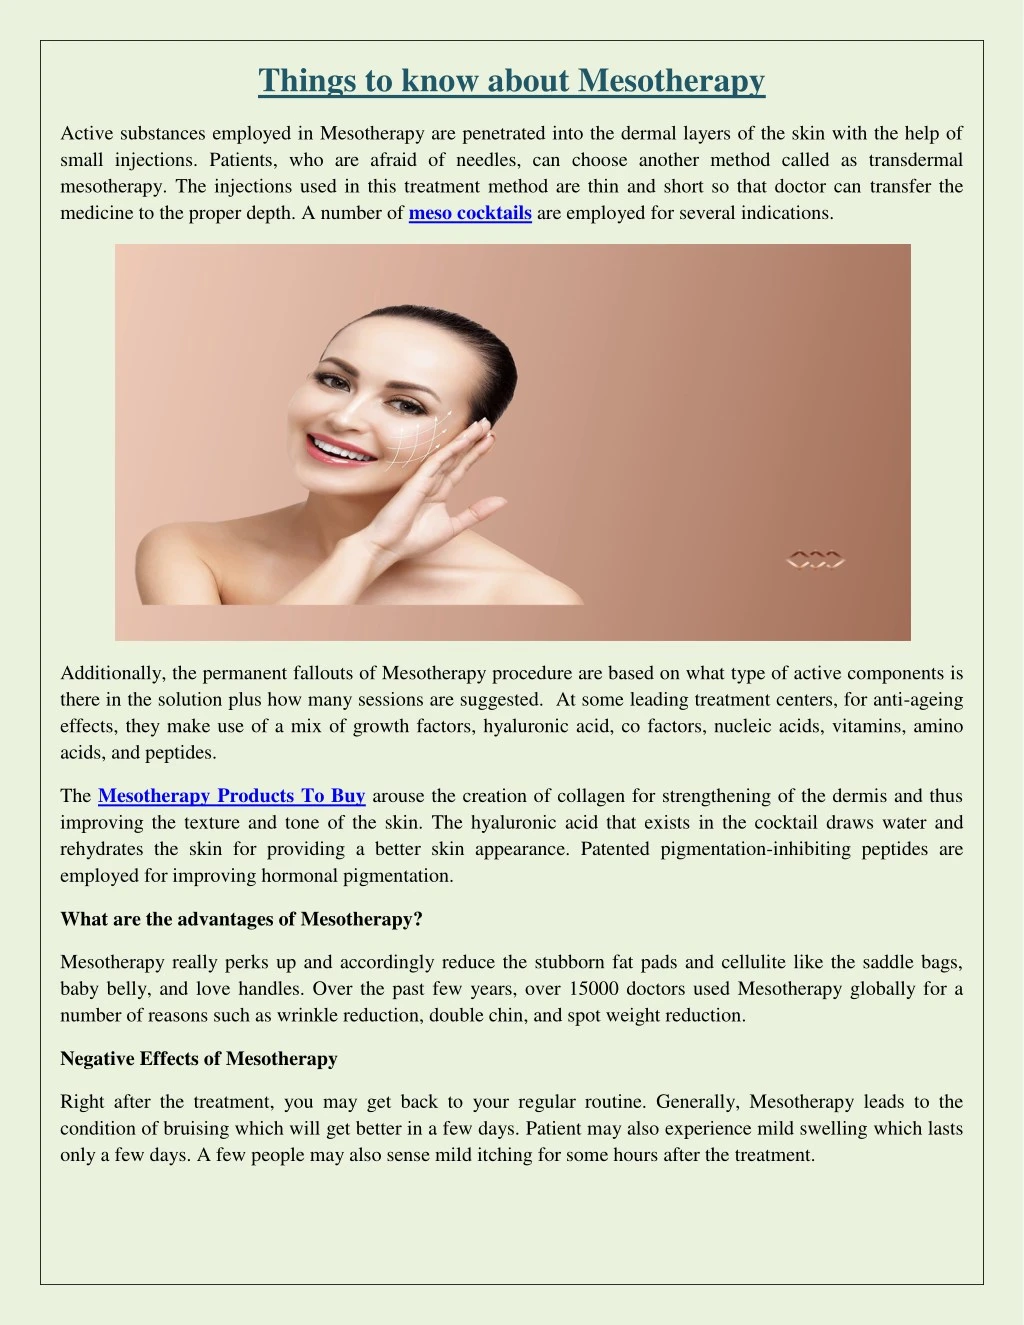 things to know about mesotherapy